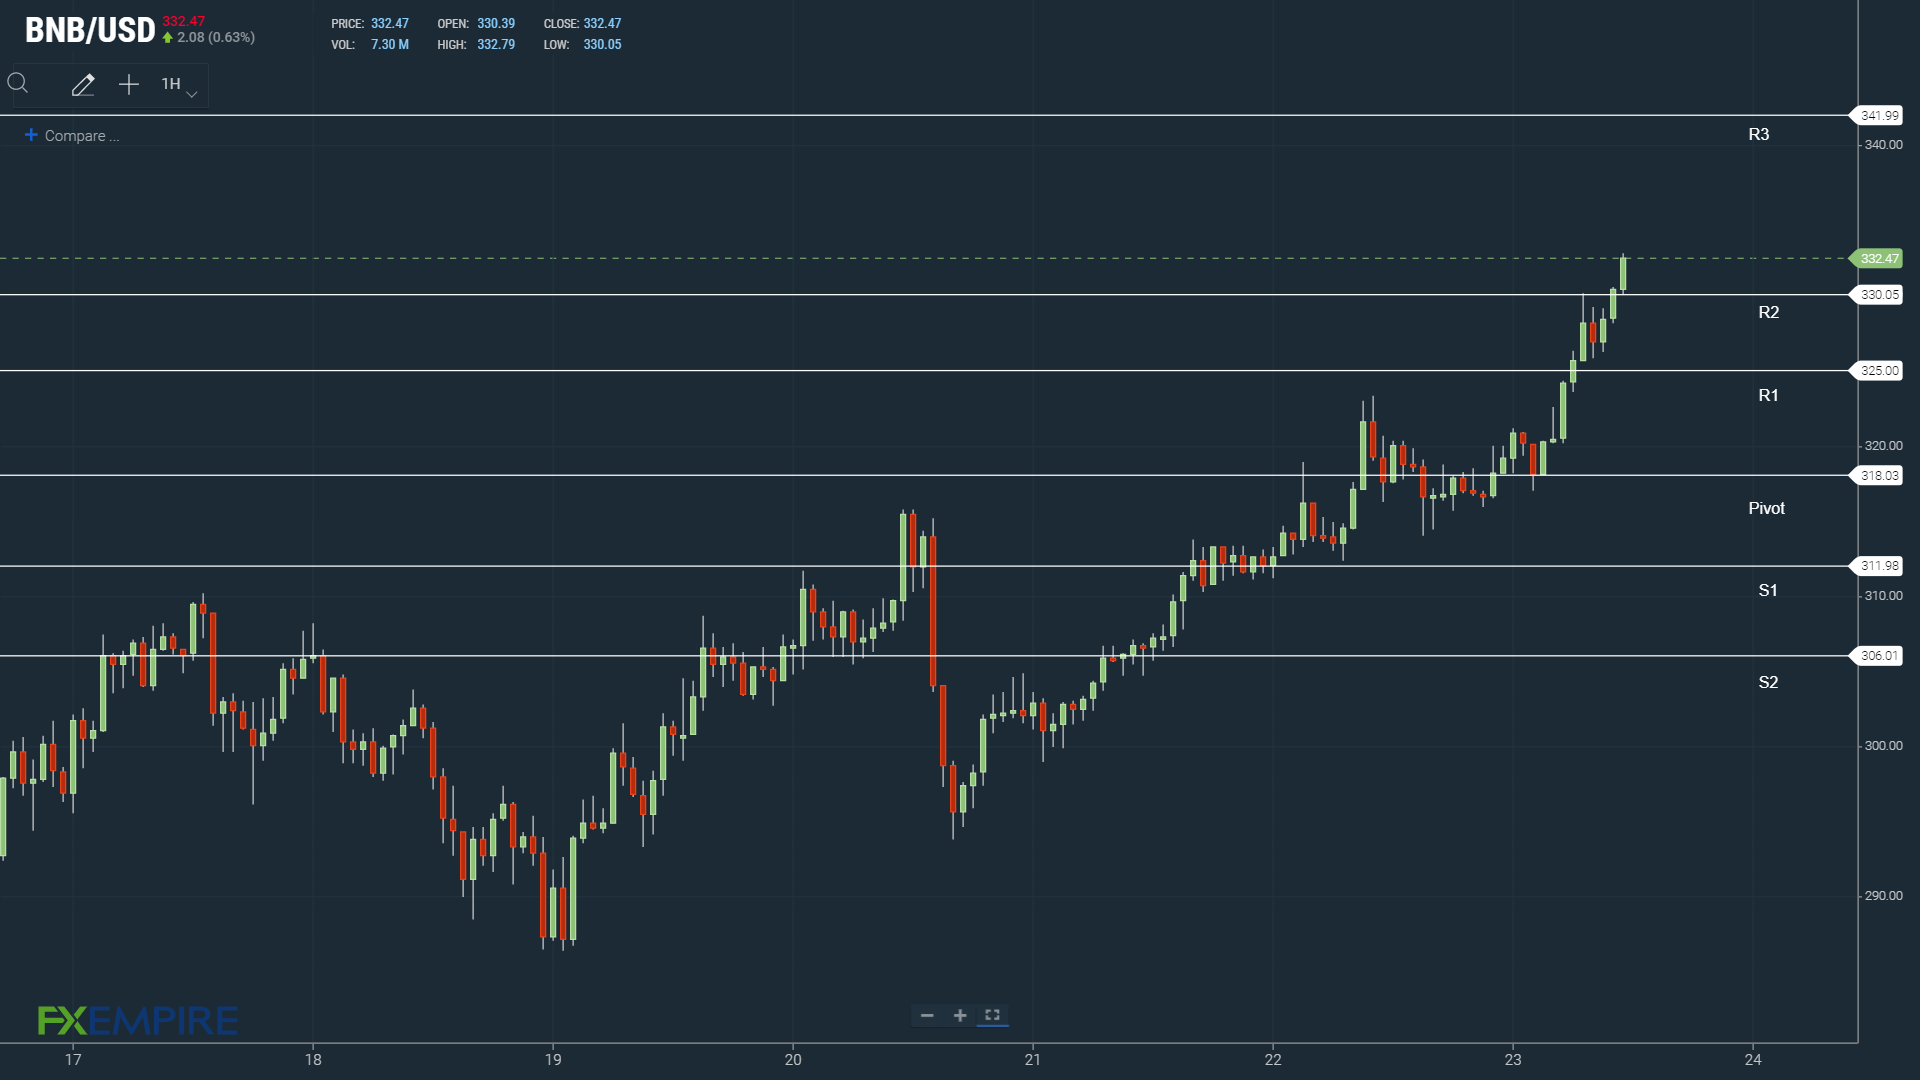 A breakout session sees BNB target $340.